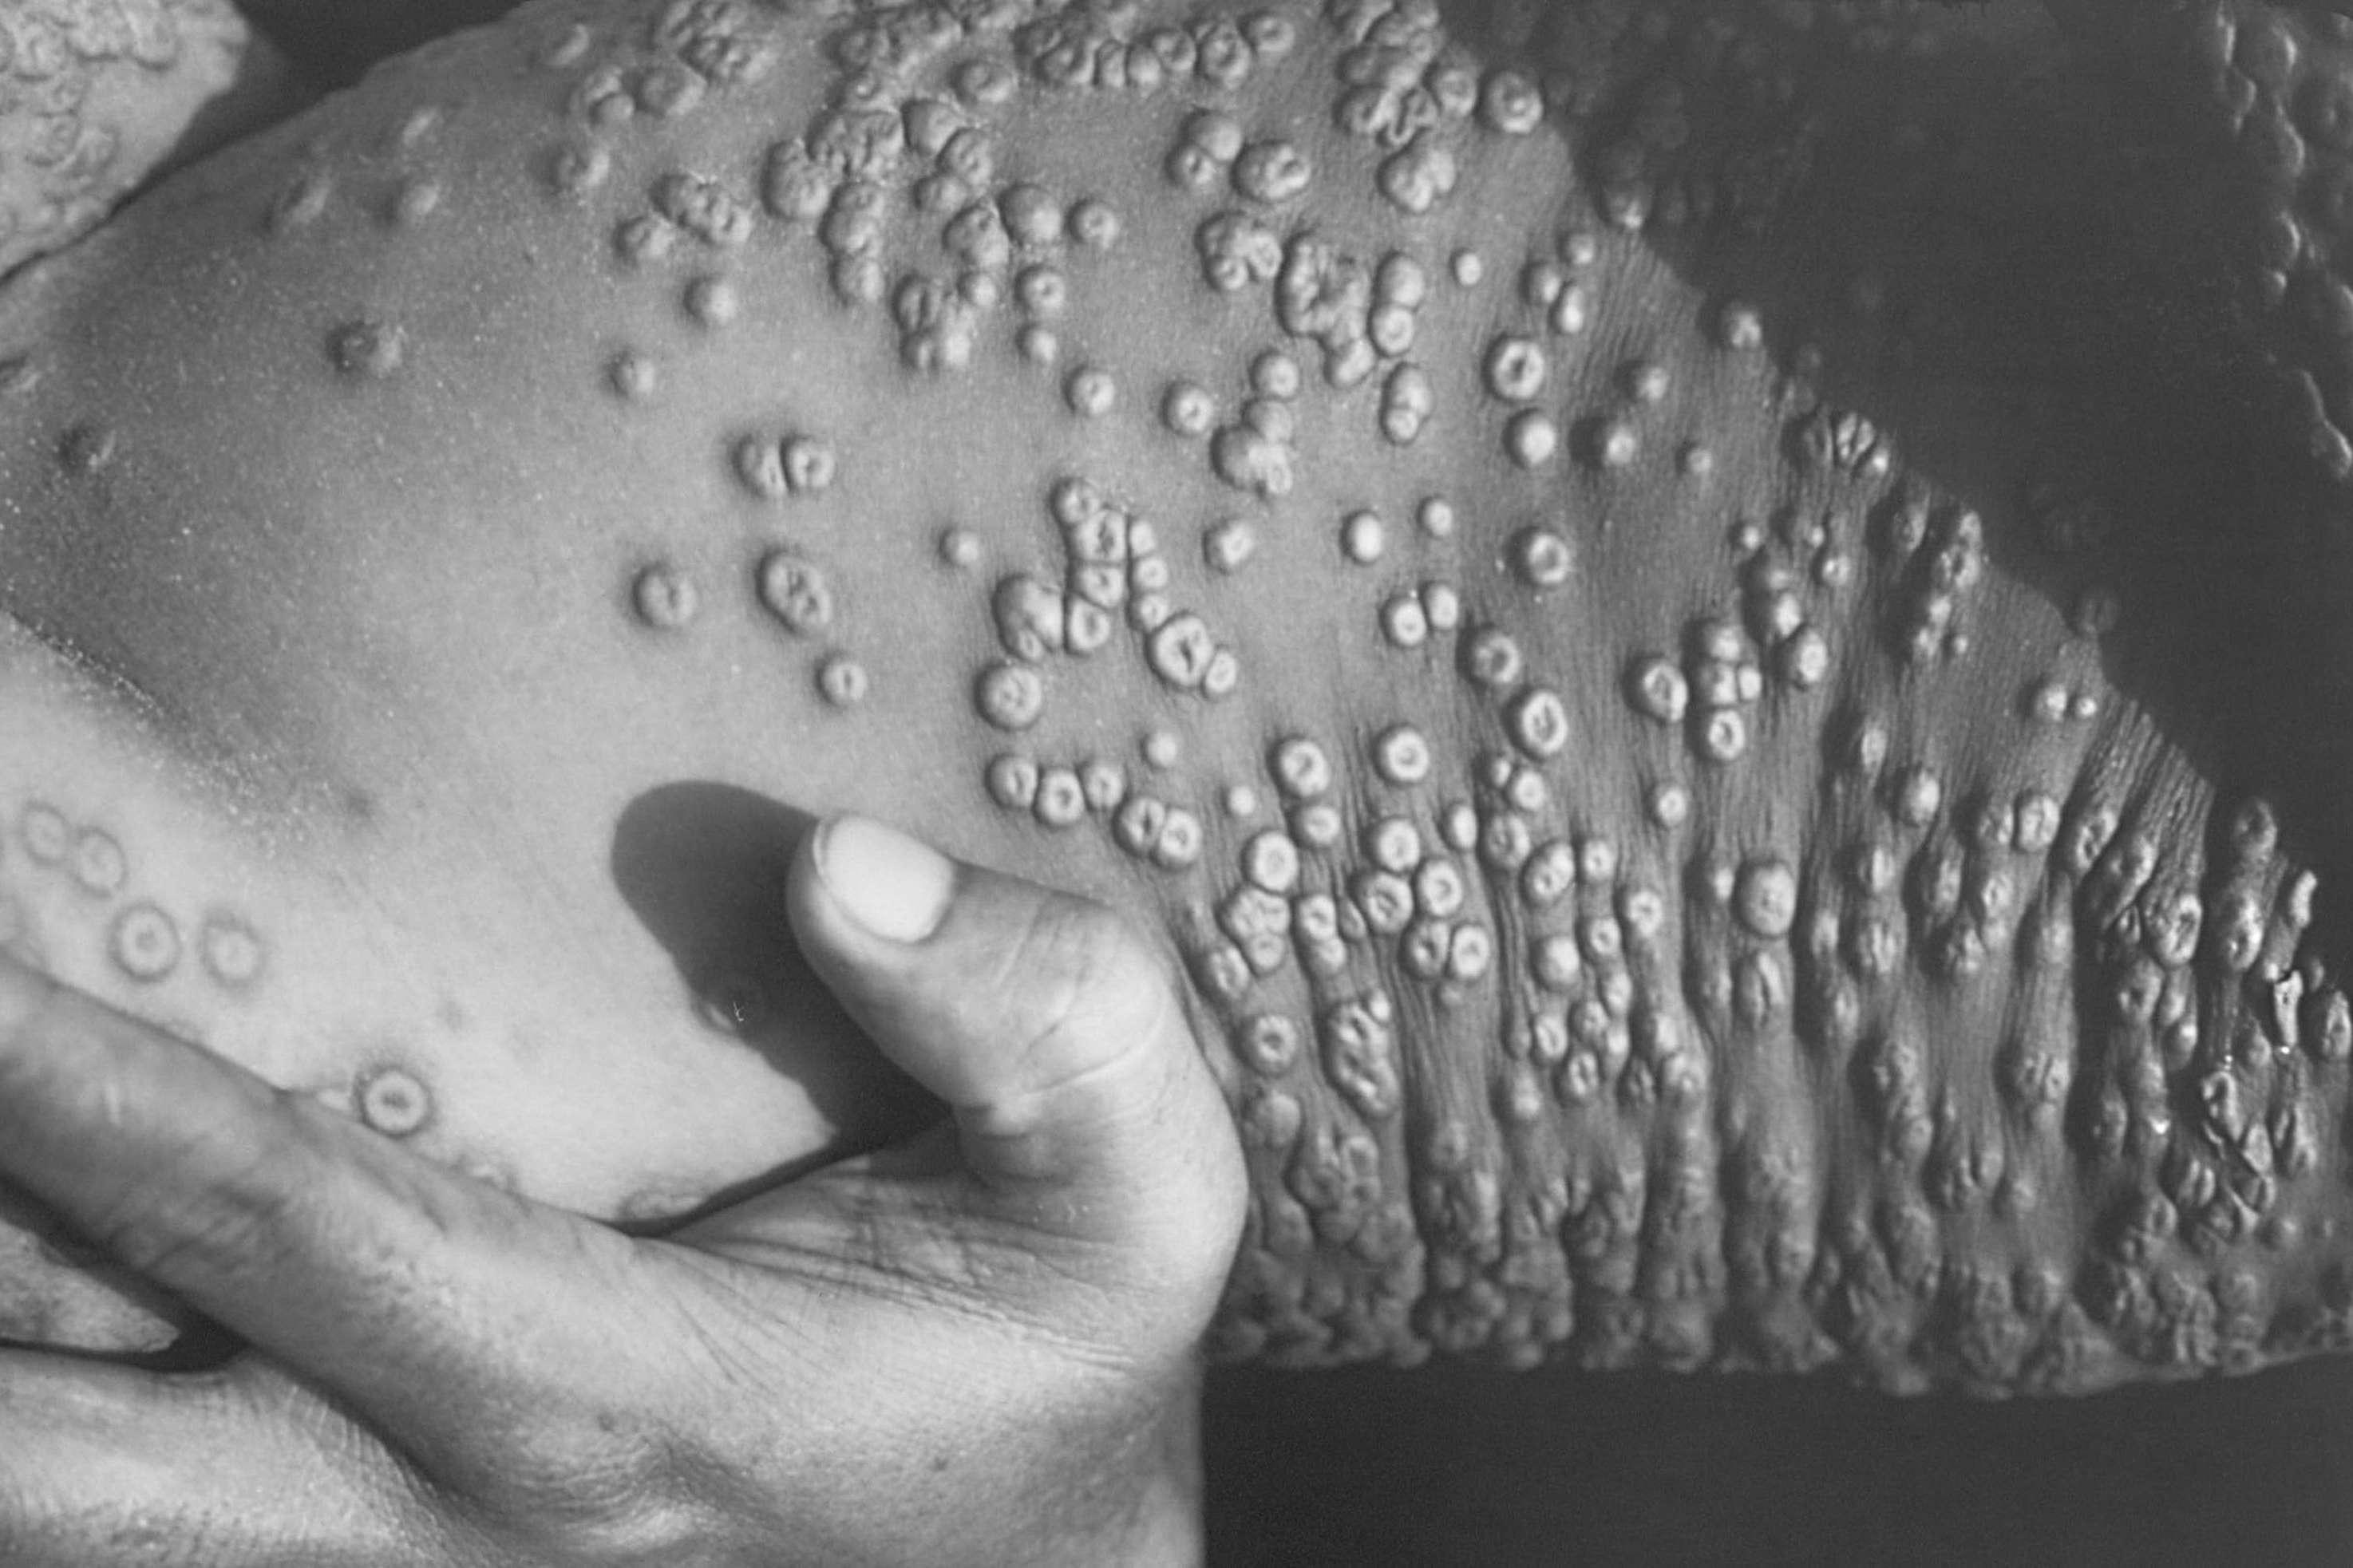 A black and white photograph shows the side of a person's body who is covered in smallpox pustules.